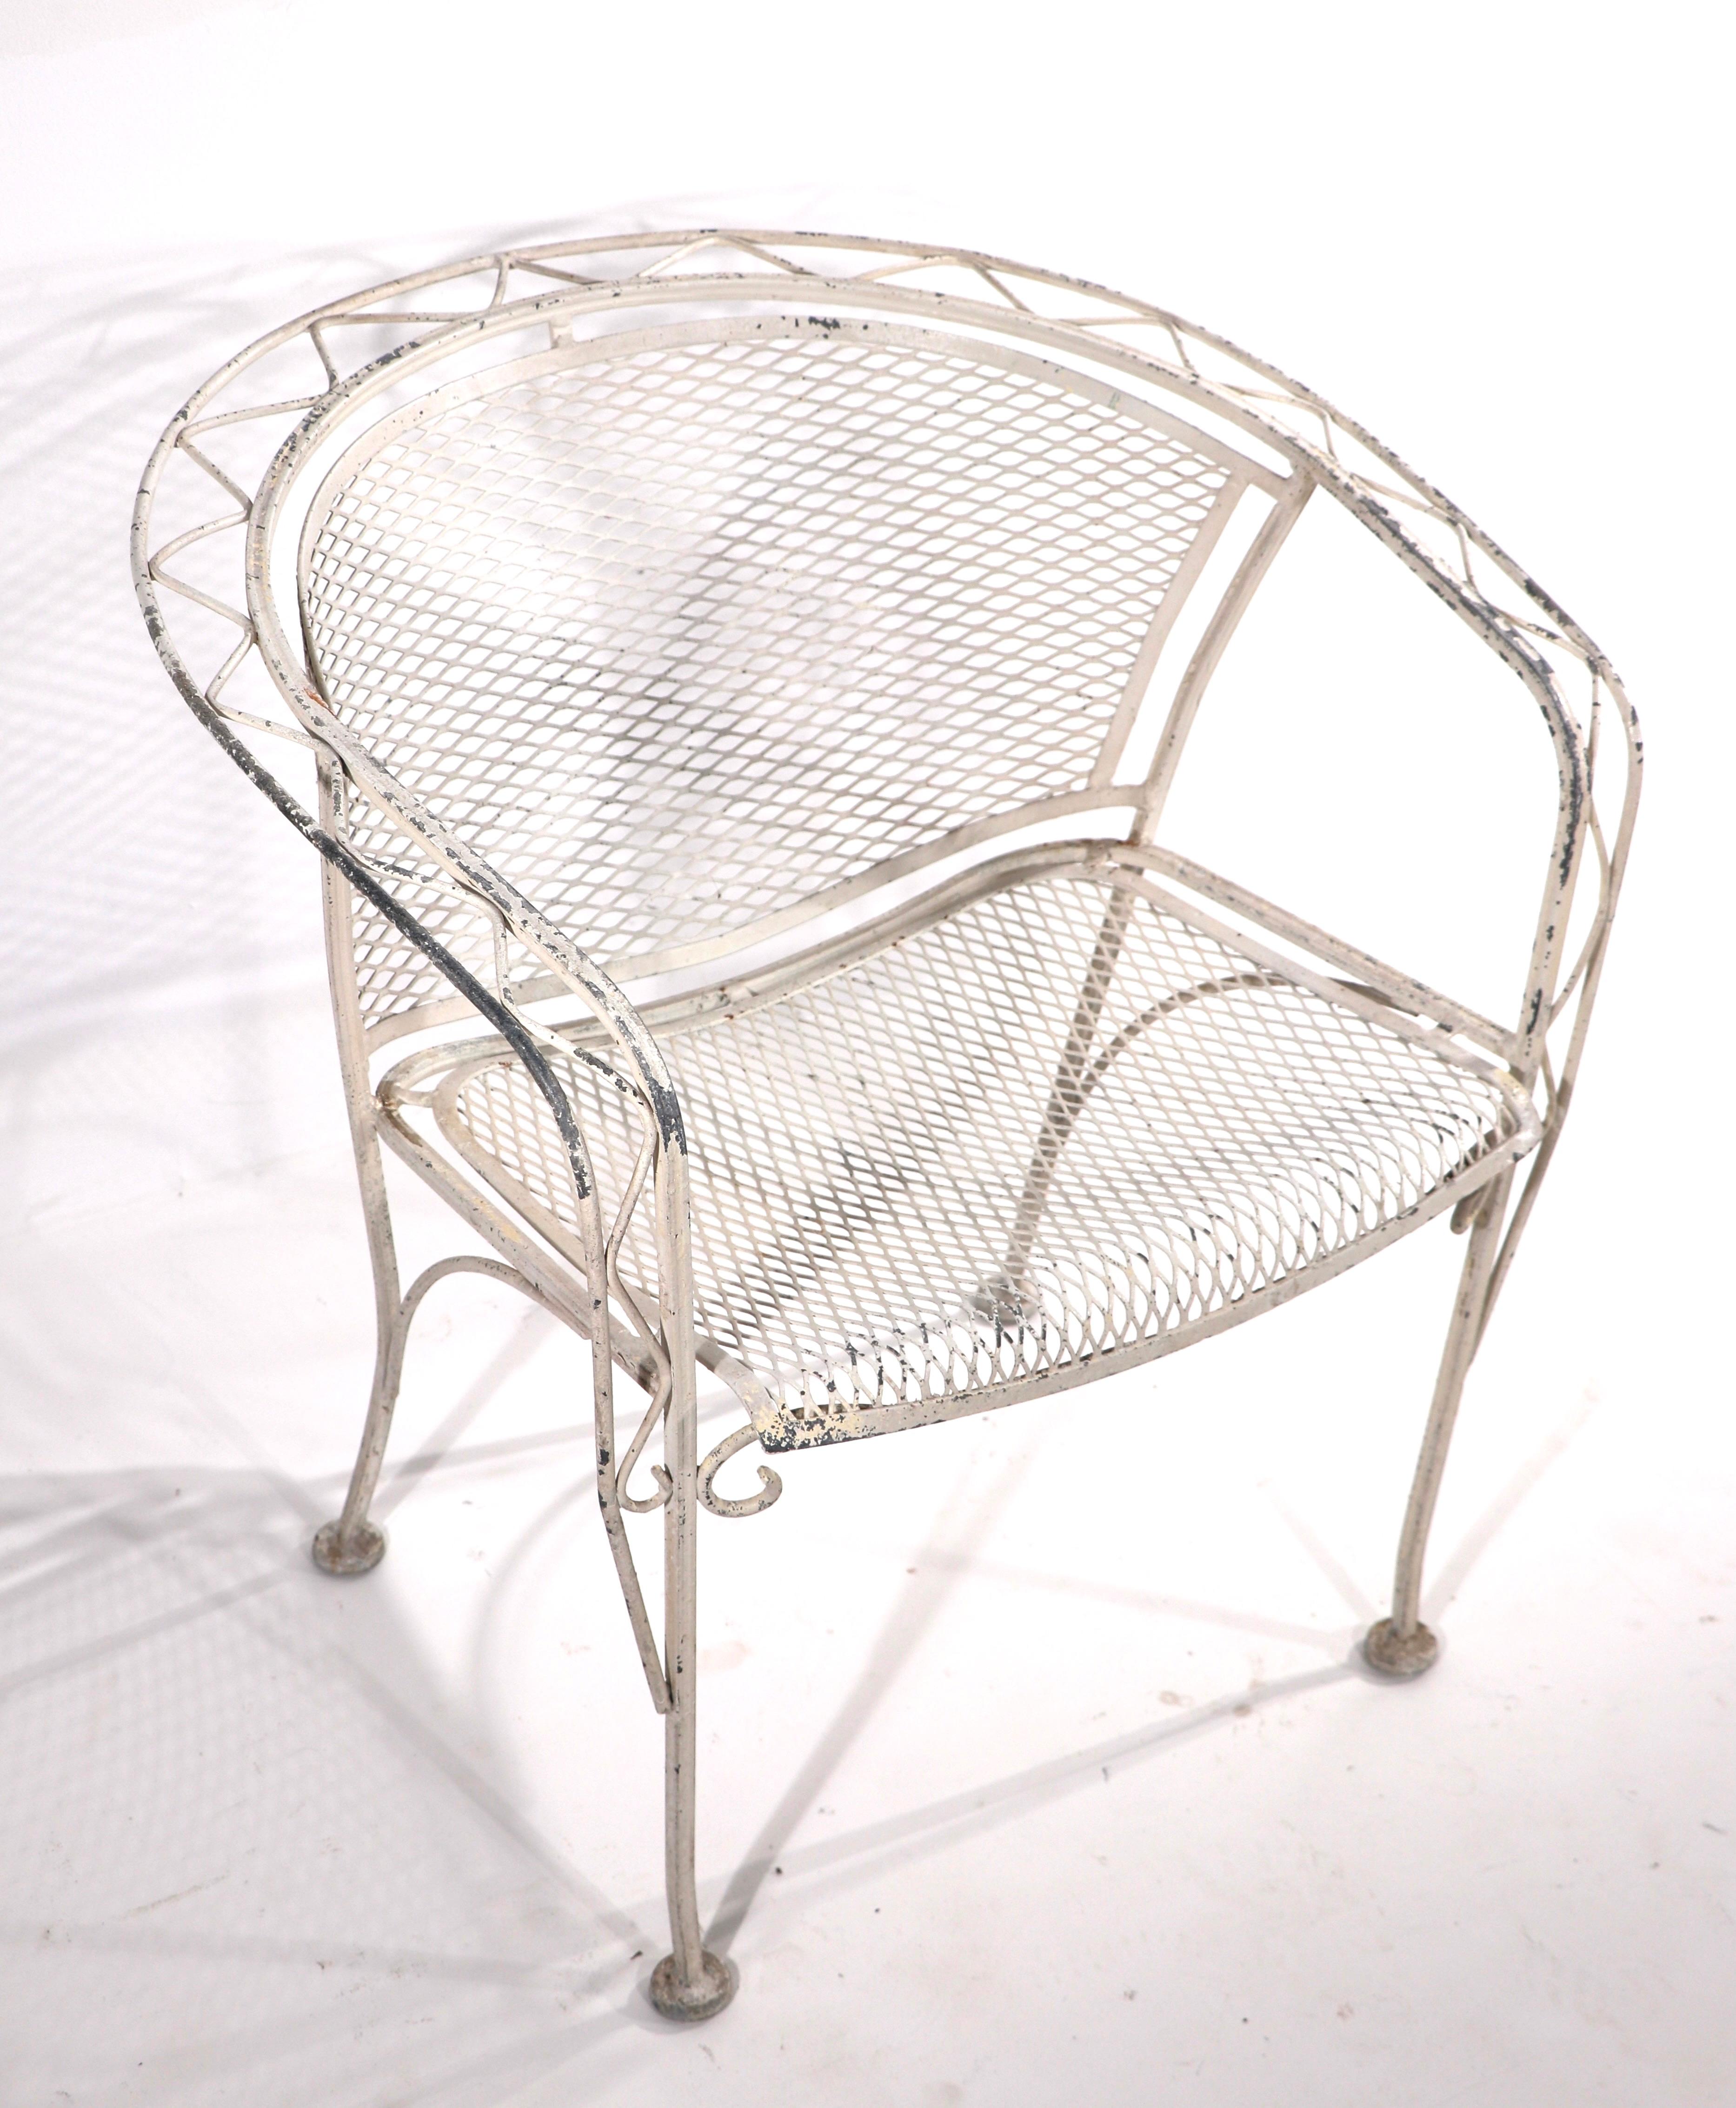 Nice Salterini garden, patio, poolside chair having a wrought iron frame with zig zag metalwork pattern, and metal mesh seat and back. The chair is in very good, original condition, free of breaks, bends, damage or repairs. The paint finish shows